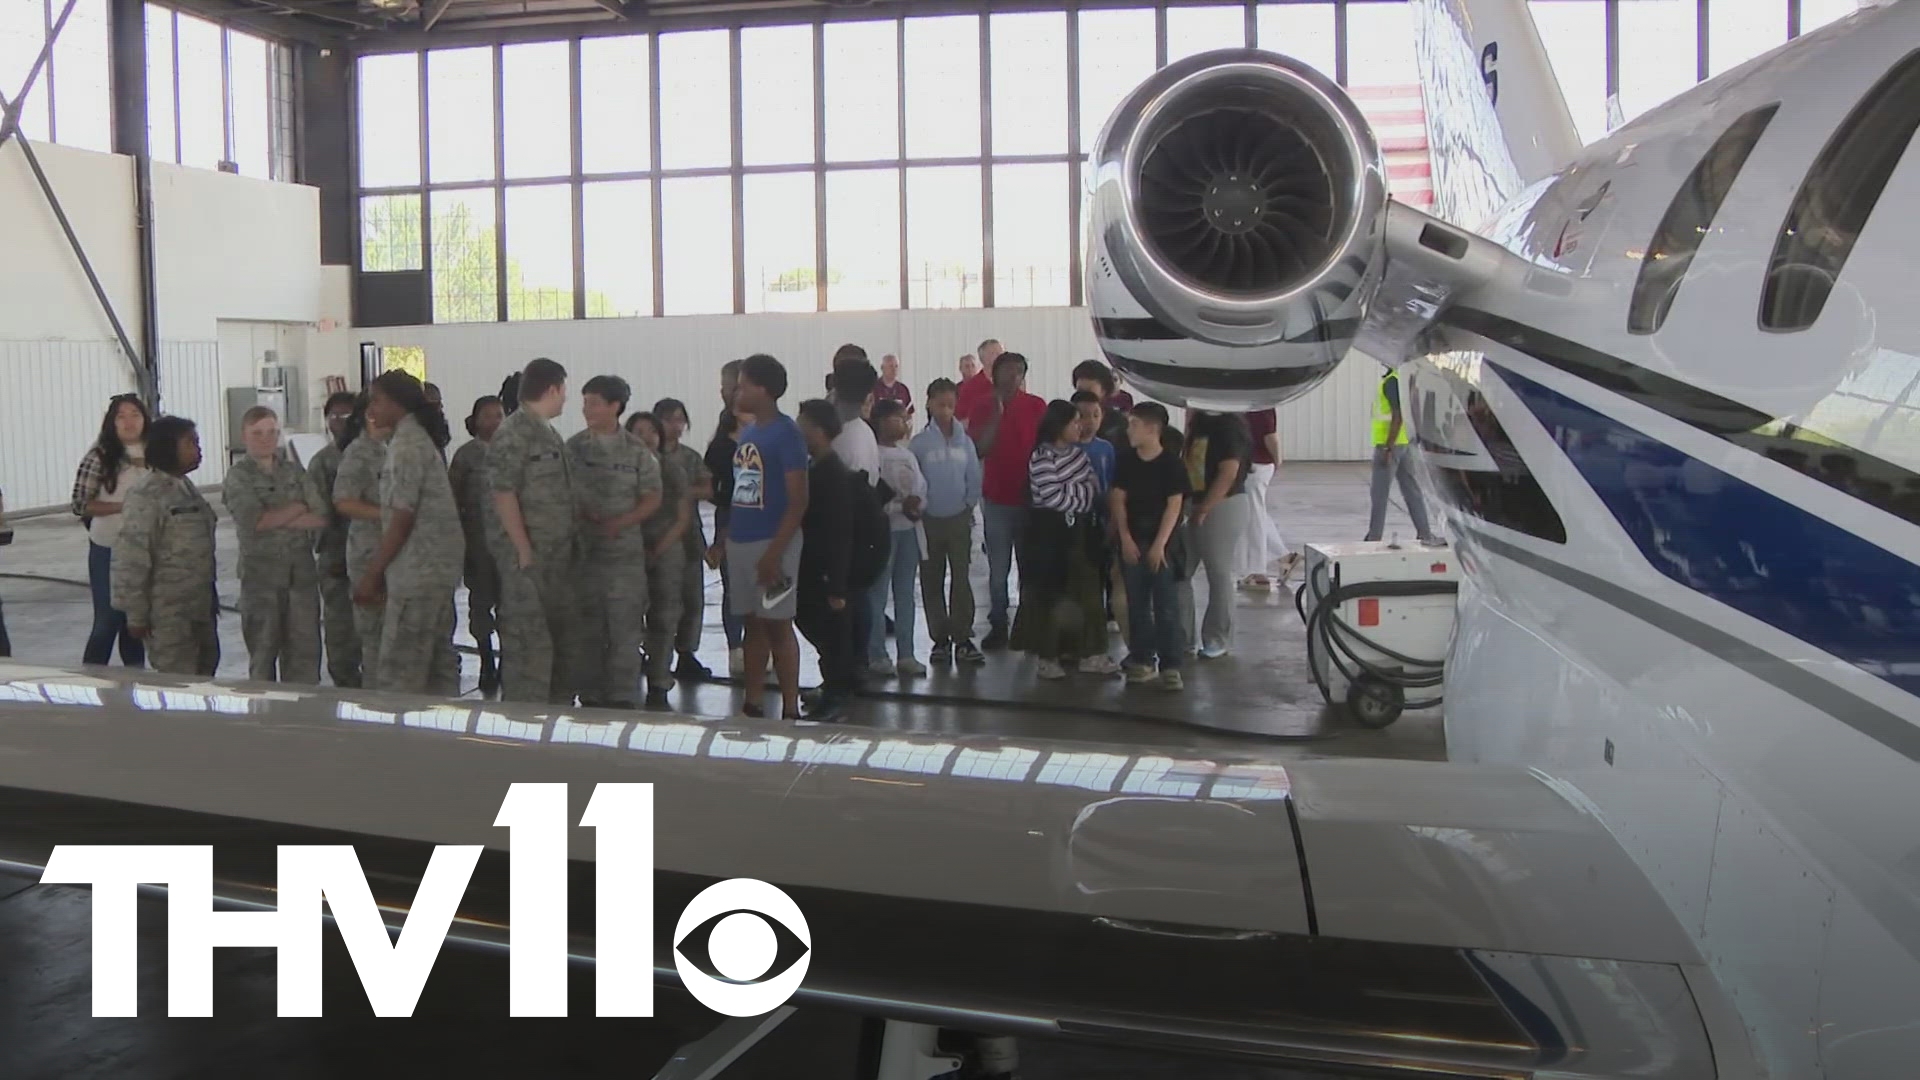 The Clinton National Airport hosted about 40 Cloverdale Middle School students to give them an inside look at what it's like to work in aviation.